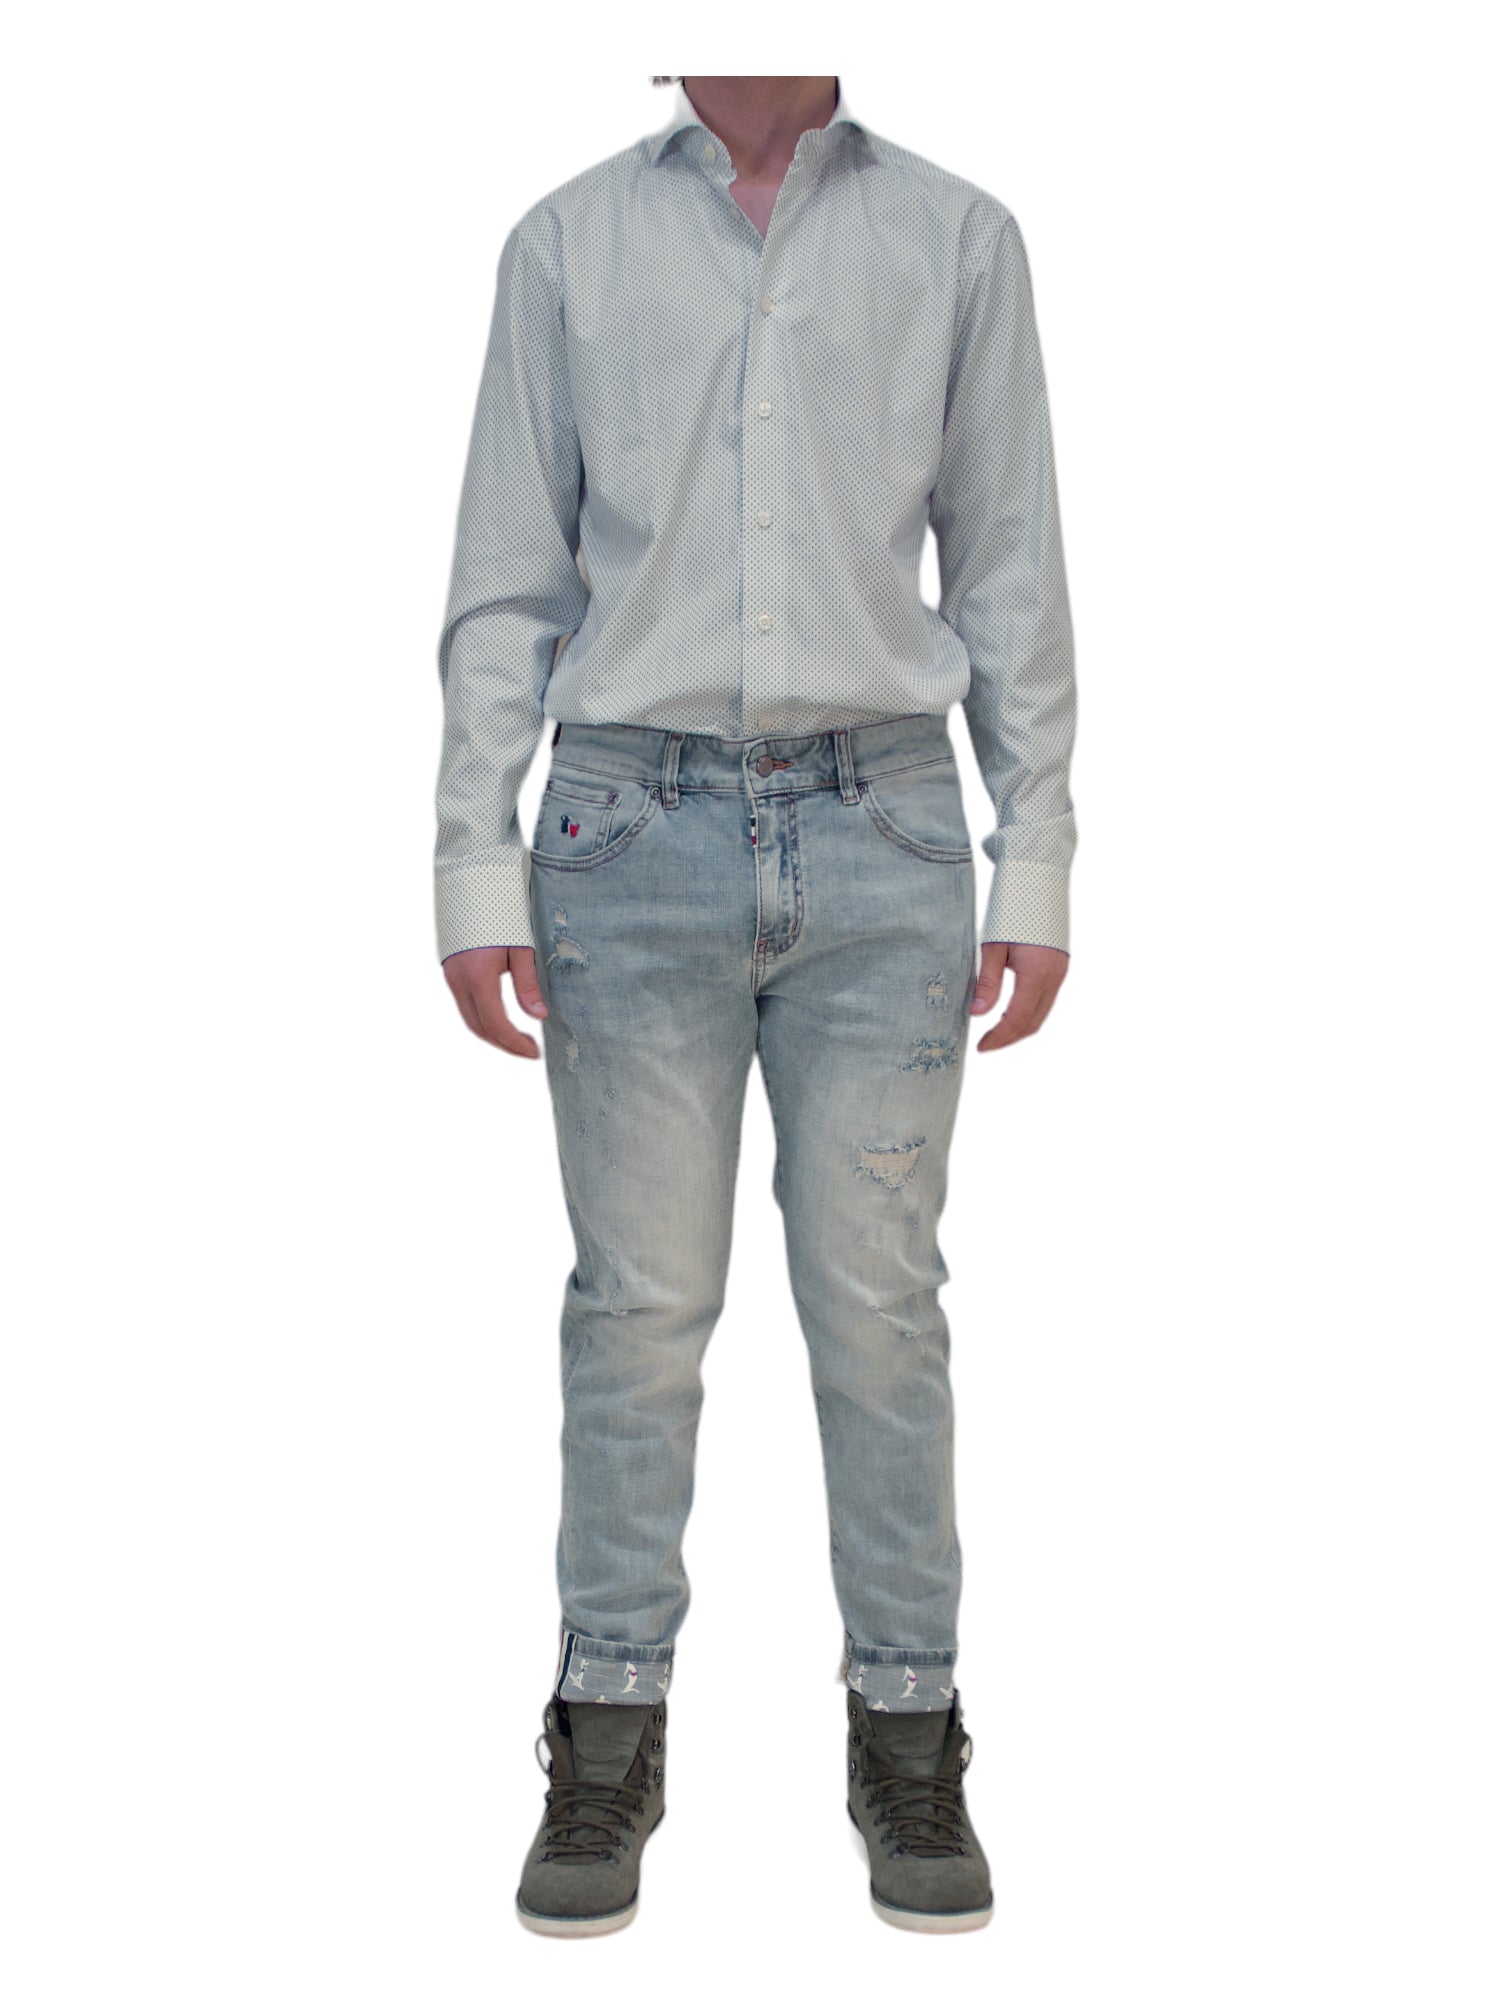 Thom Browne Blue Light Wash Distressed Jeans - Genuine Design luxury consignment Calgary, Alberta, Canada New and pre-owned clothing, shoes, accessories.